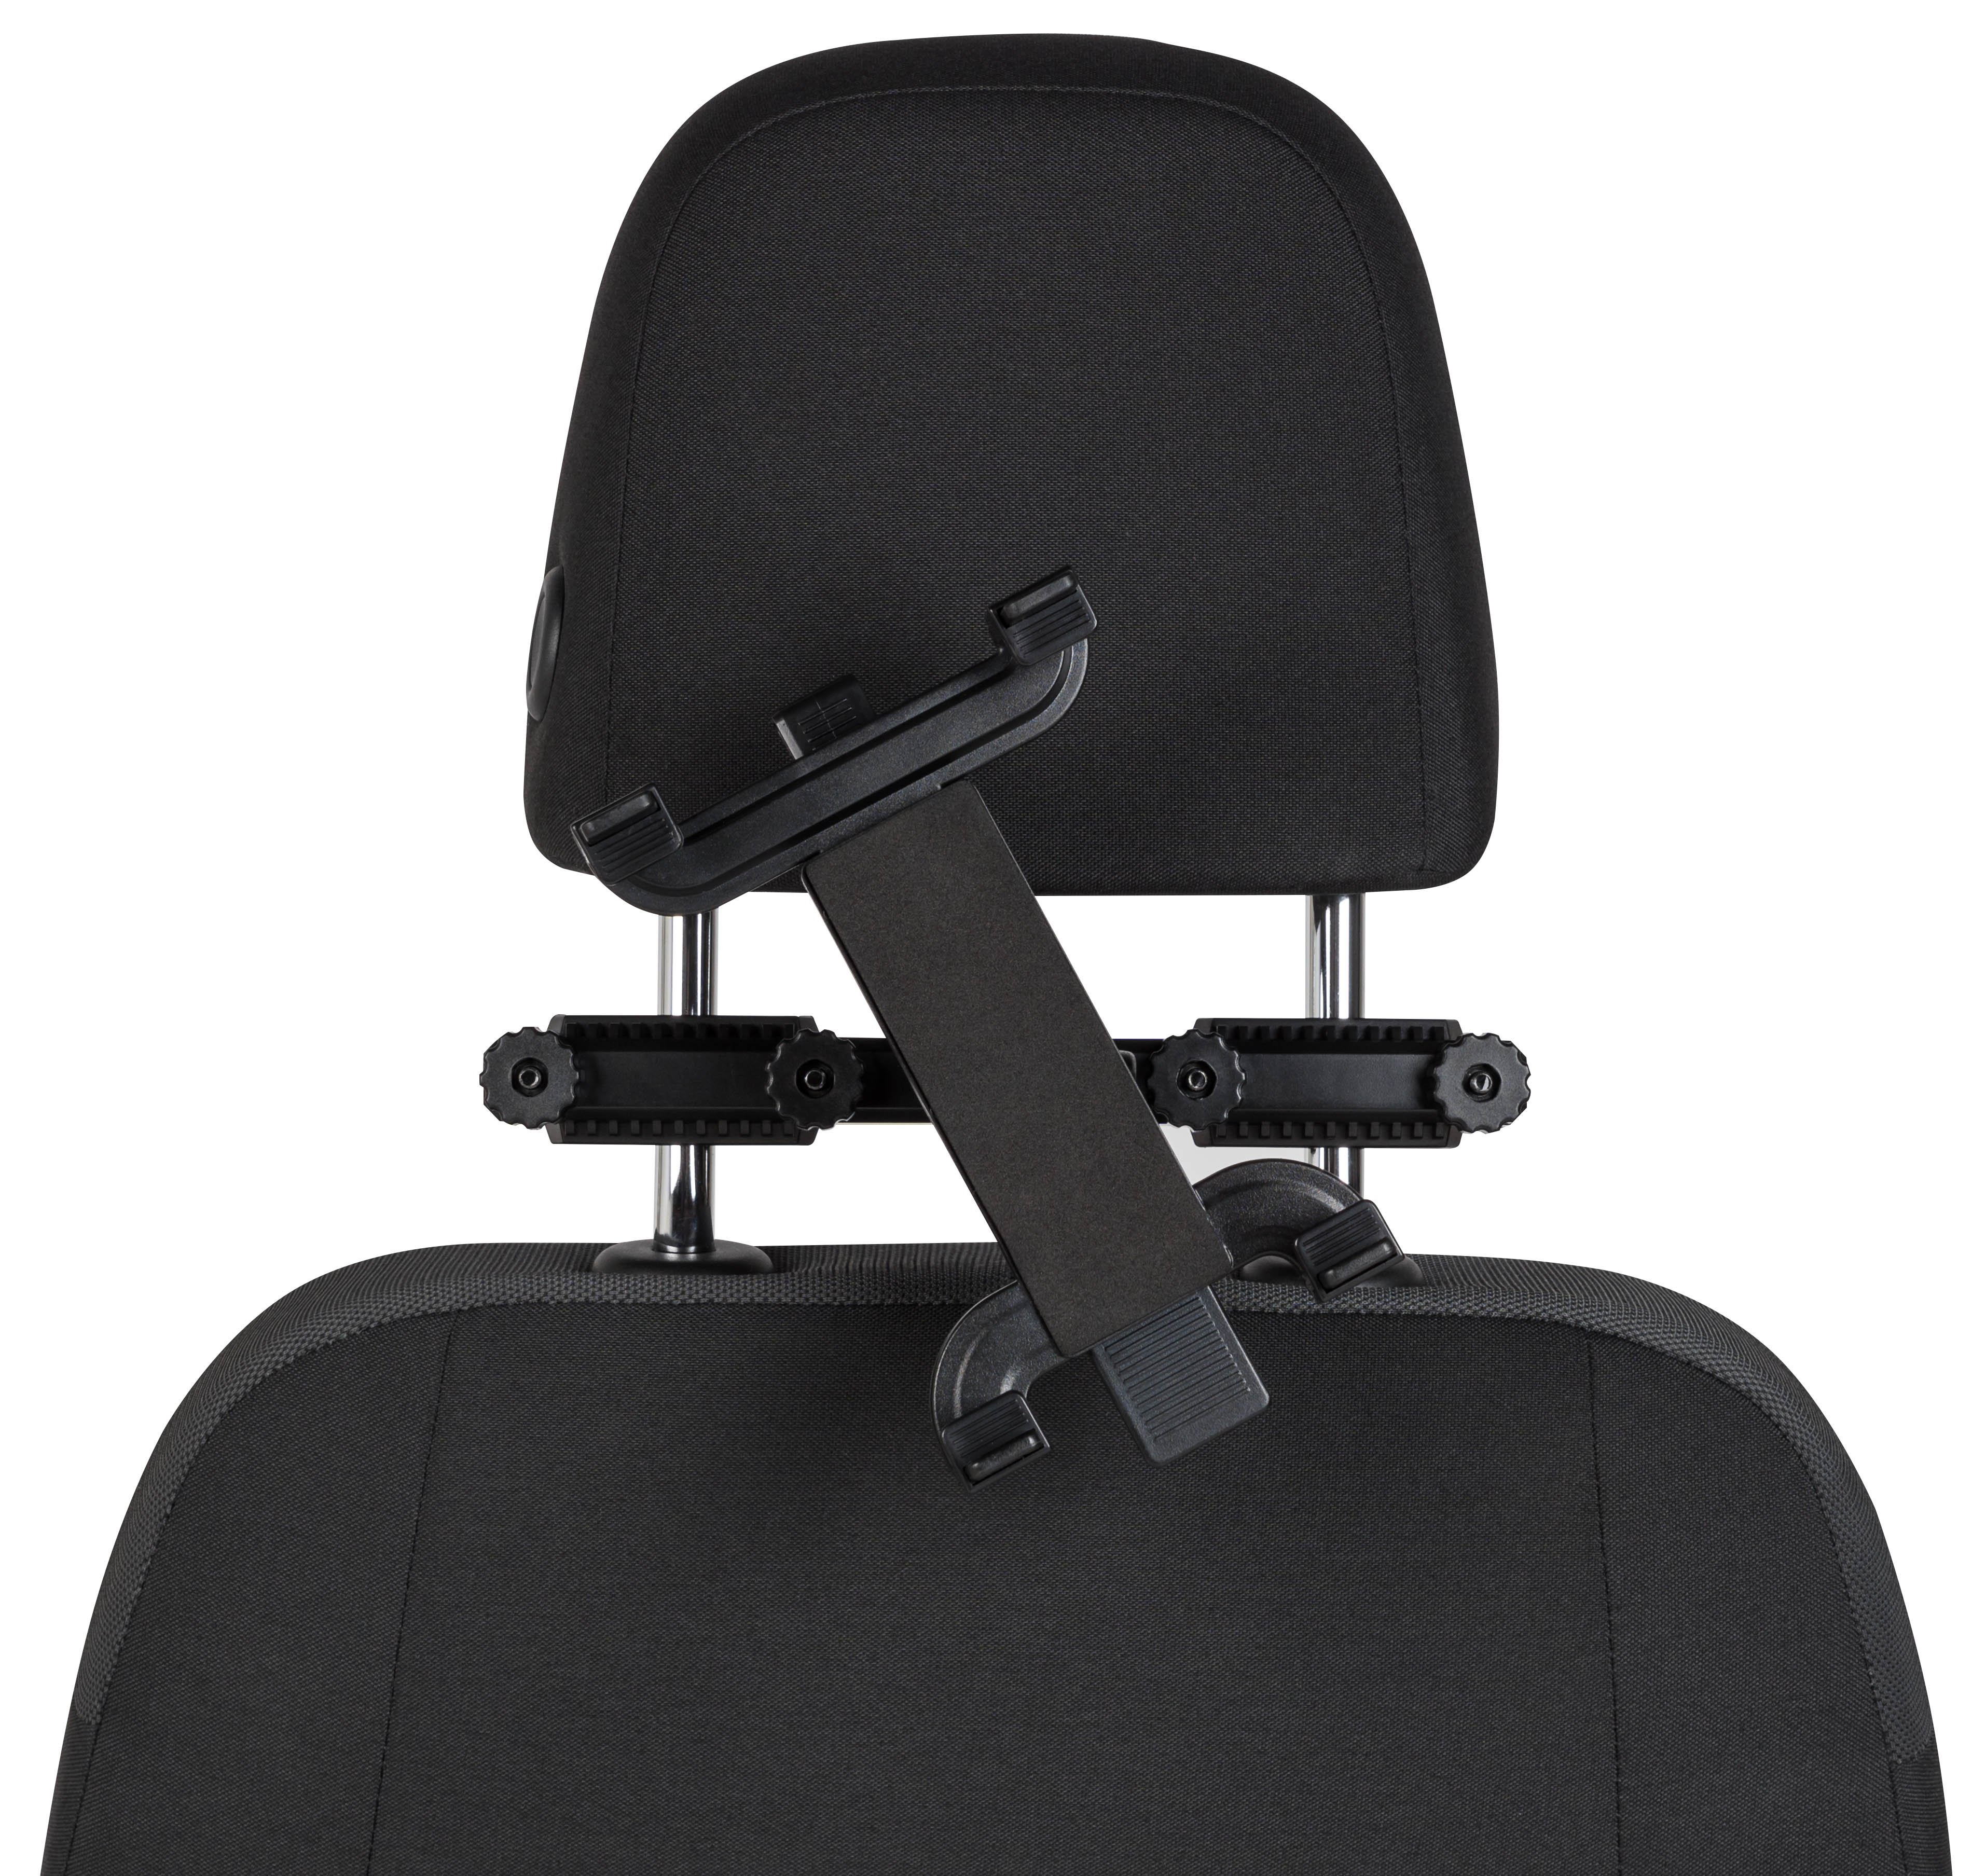 Premium car tray holder for headrest suitable for 10 inch trays